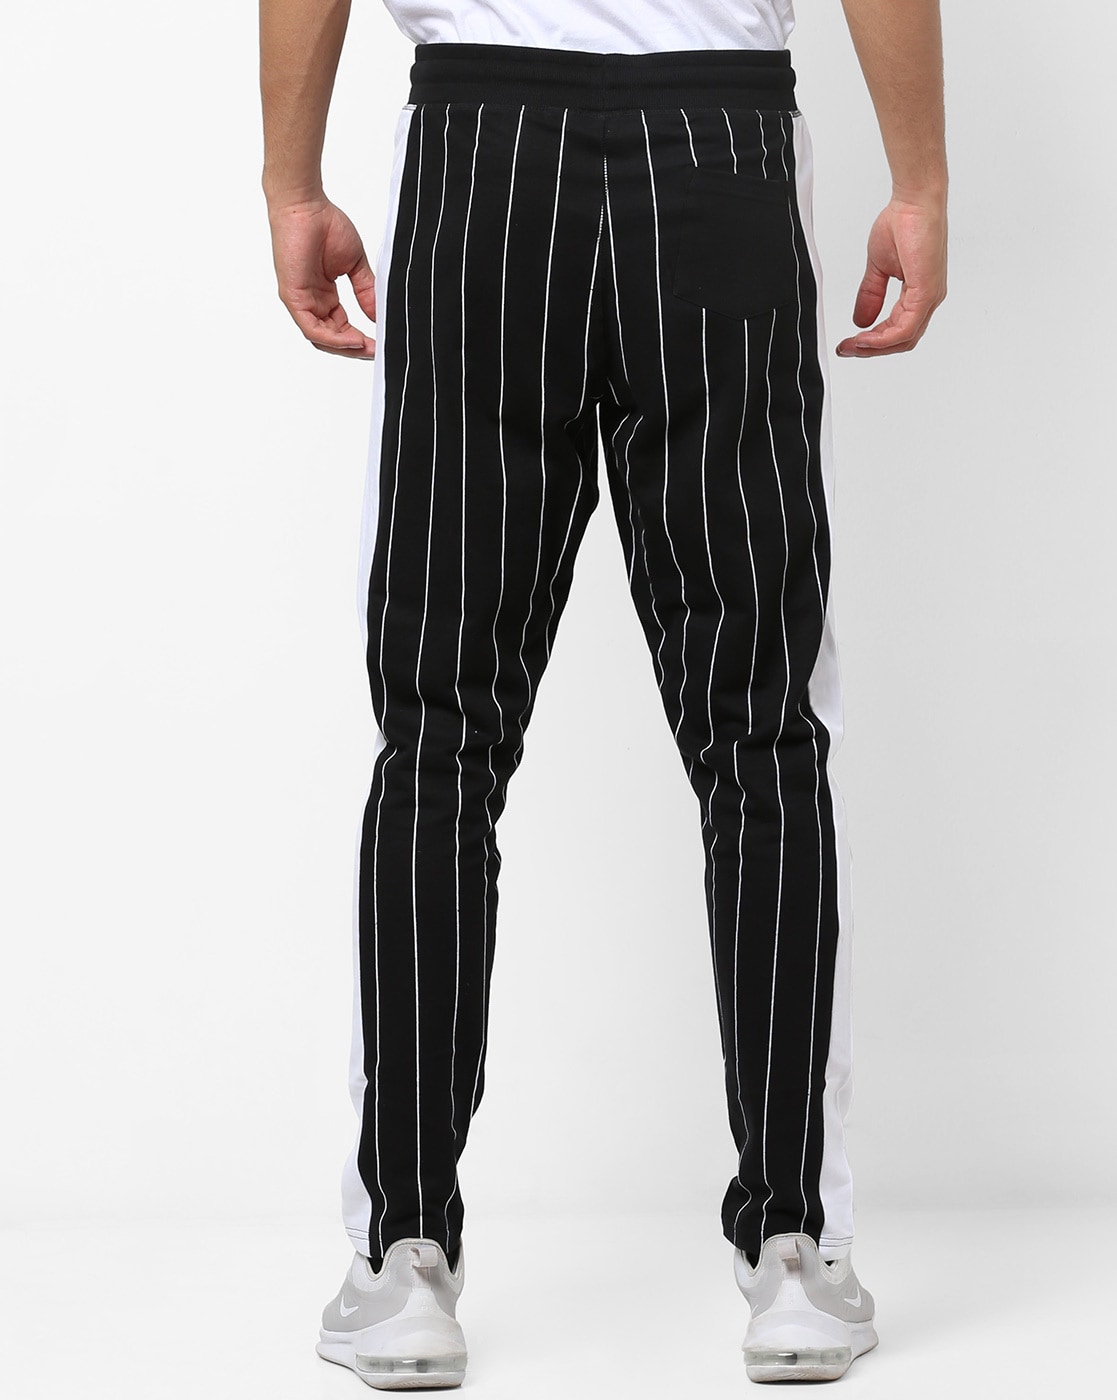 black and white striped pants mens